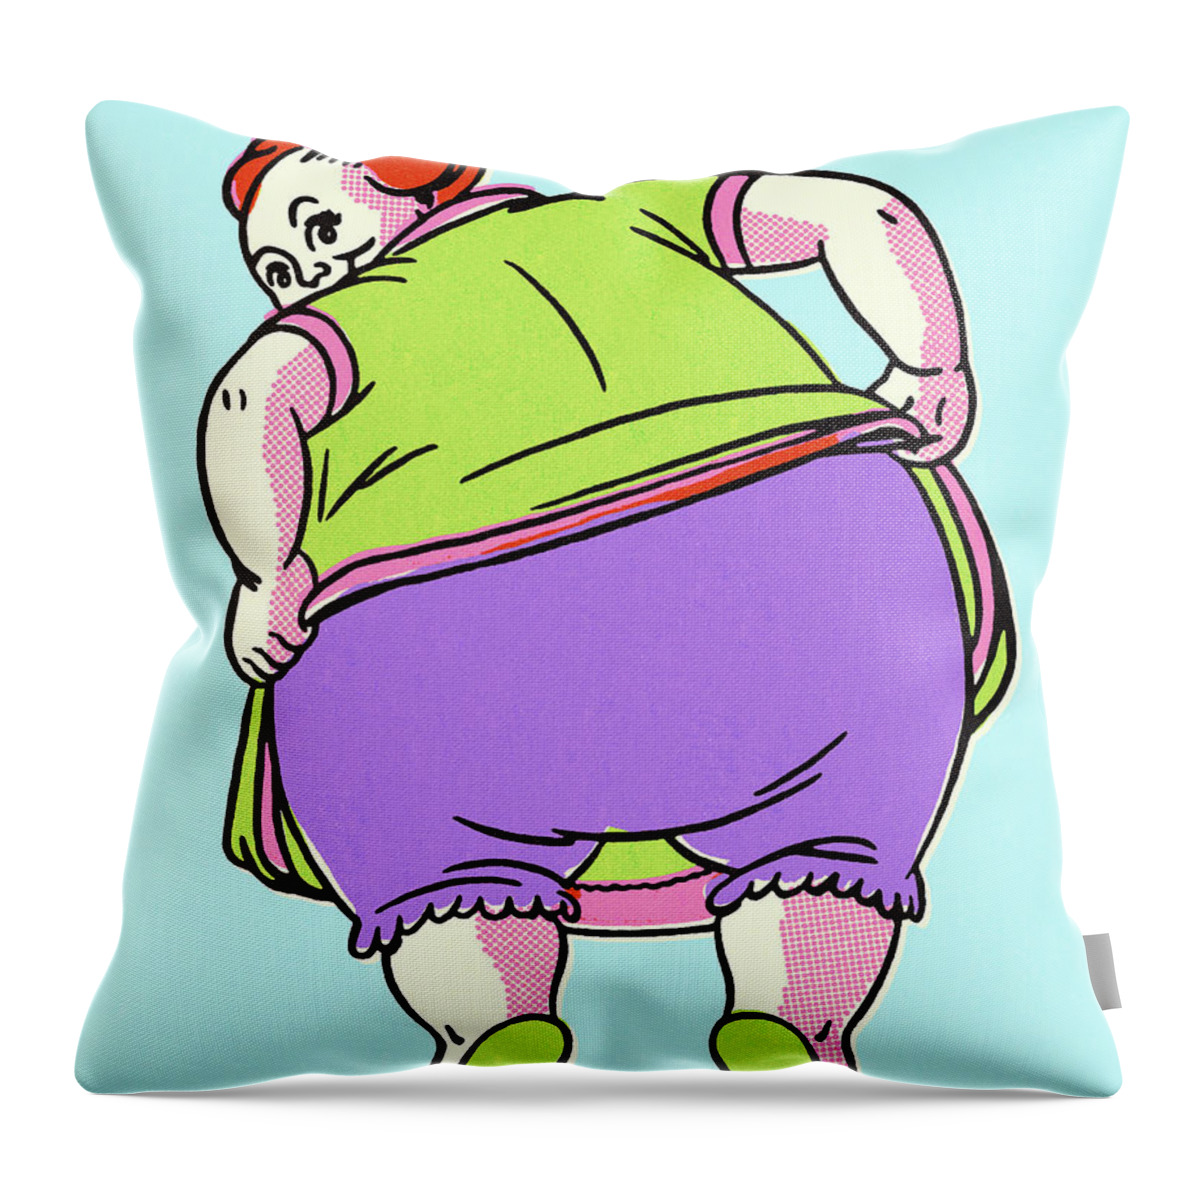 Adult Throw Pillow featuring the drawing Obese Woman Showing Her Rear End by CSA Images